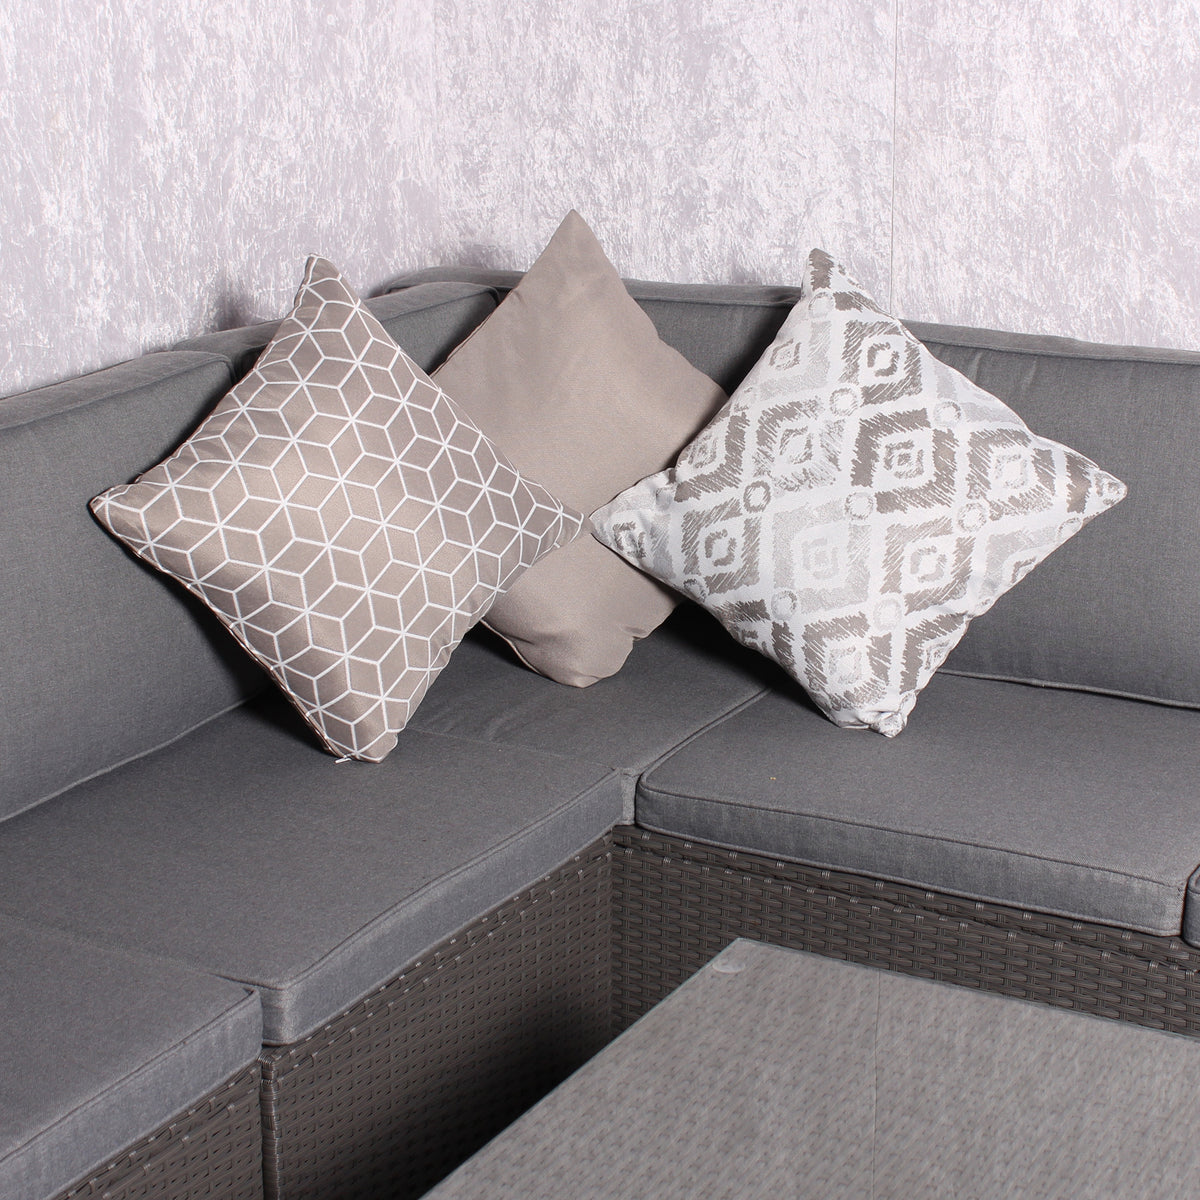 Outdoor Grey Plain Scatter Cushion